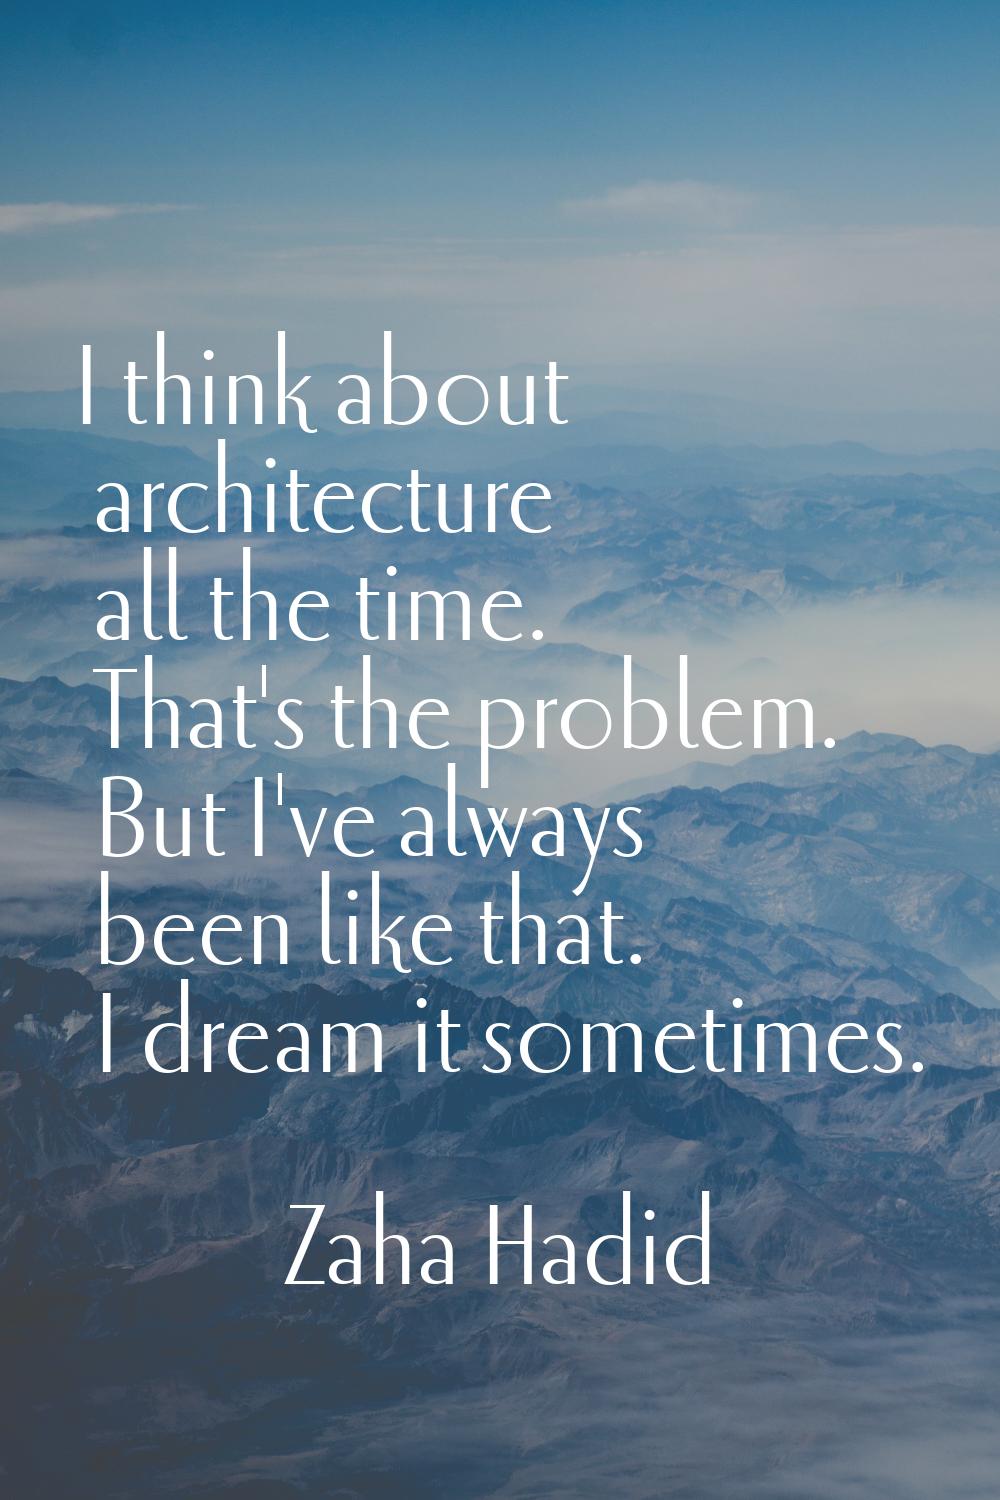 I think about architecture all the time. That's the problem. But I've always been like that. I drea